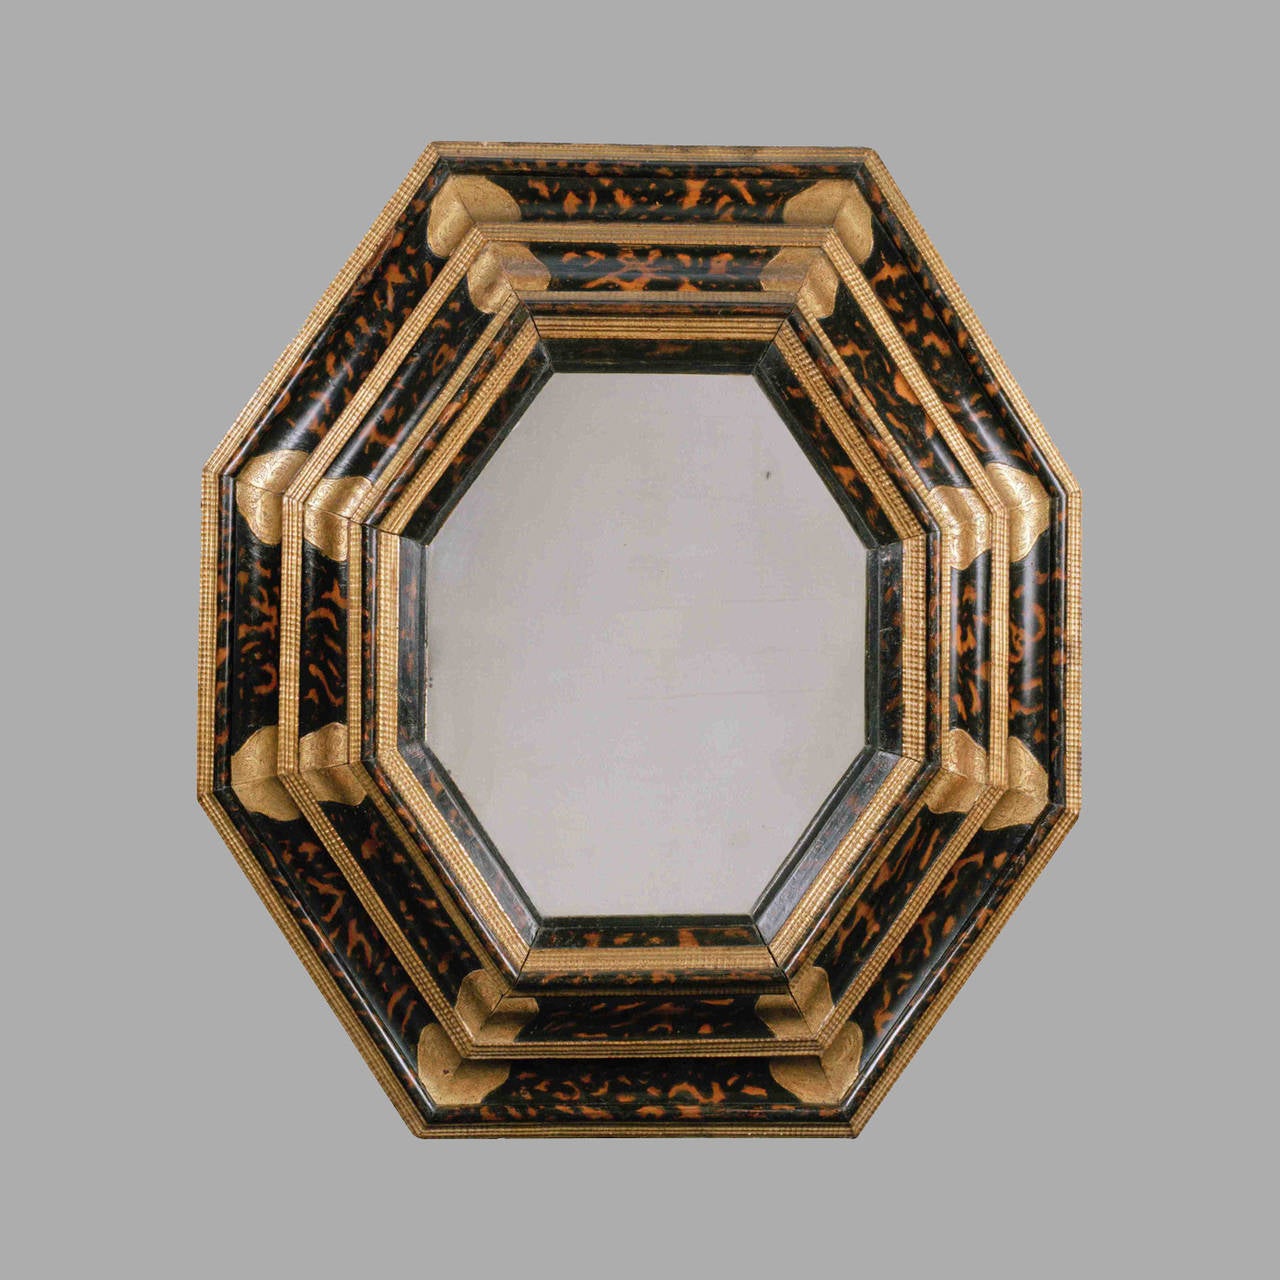 An octagonal moulded wooden mirror from Italy, Les Marches, late 17th century.

It has kept its original decoration in trompe-l’oeil
tortoiseshell, it has also kept its original engraved gilding.
The three superimposed levels reminds of the